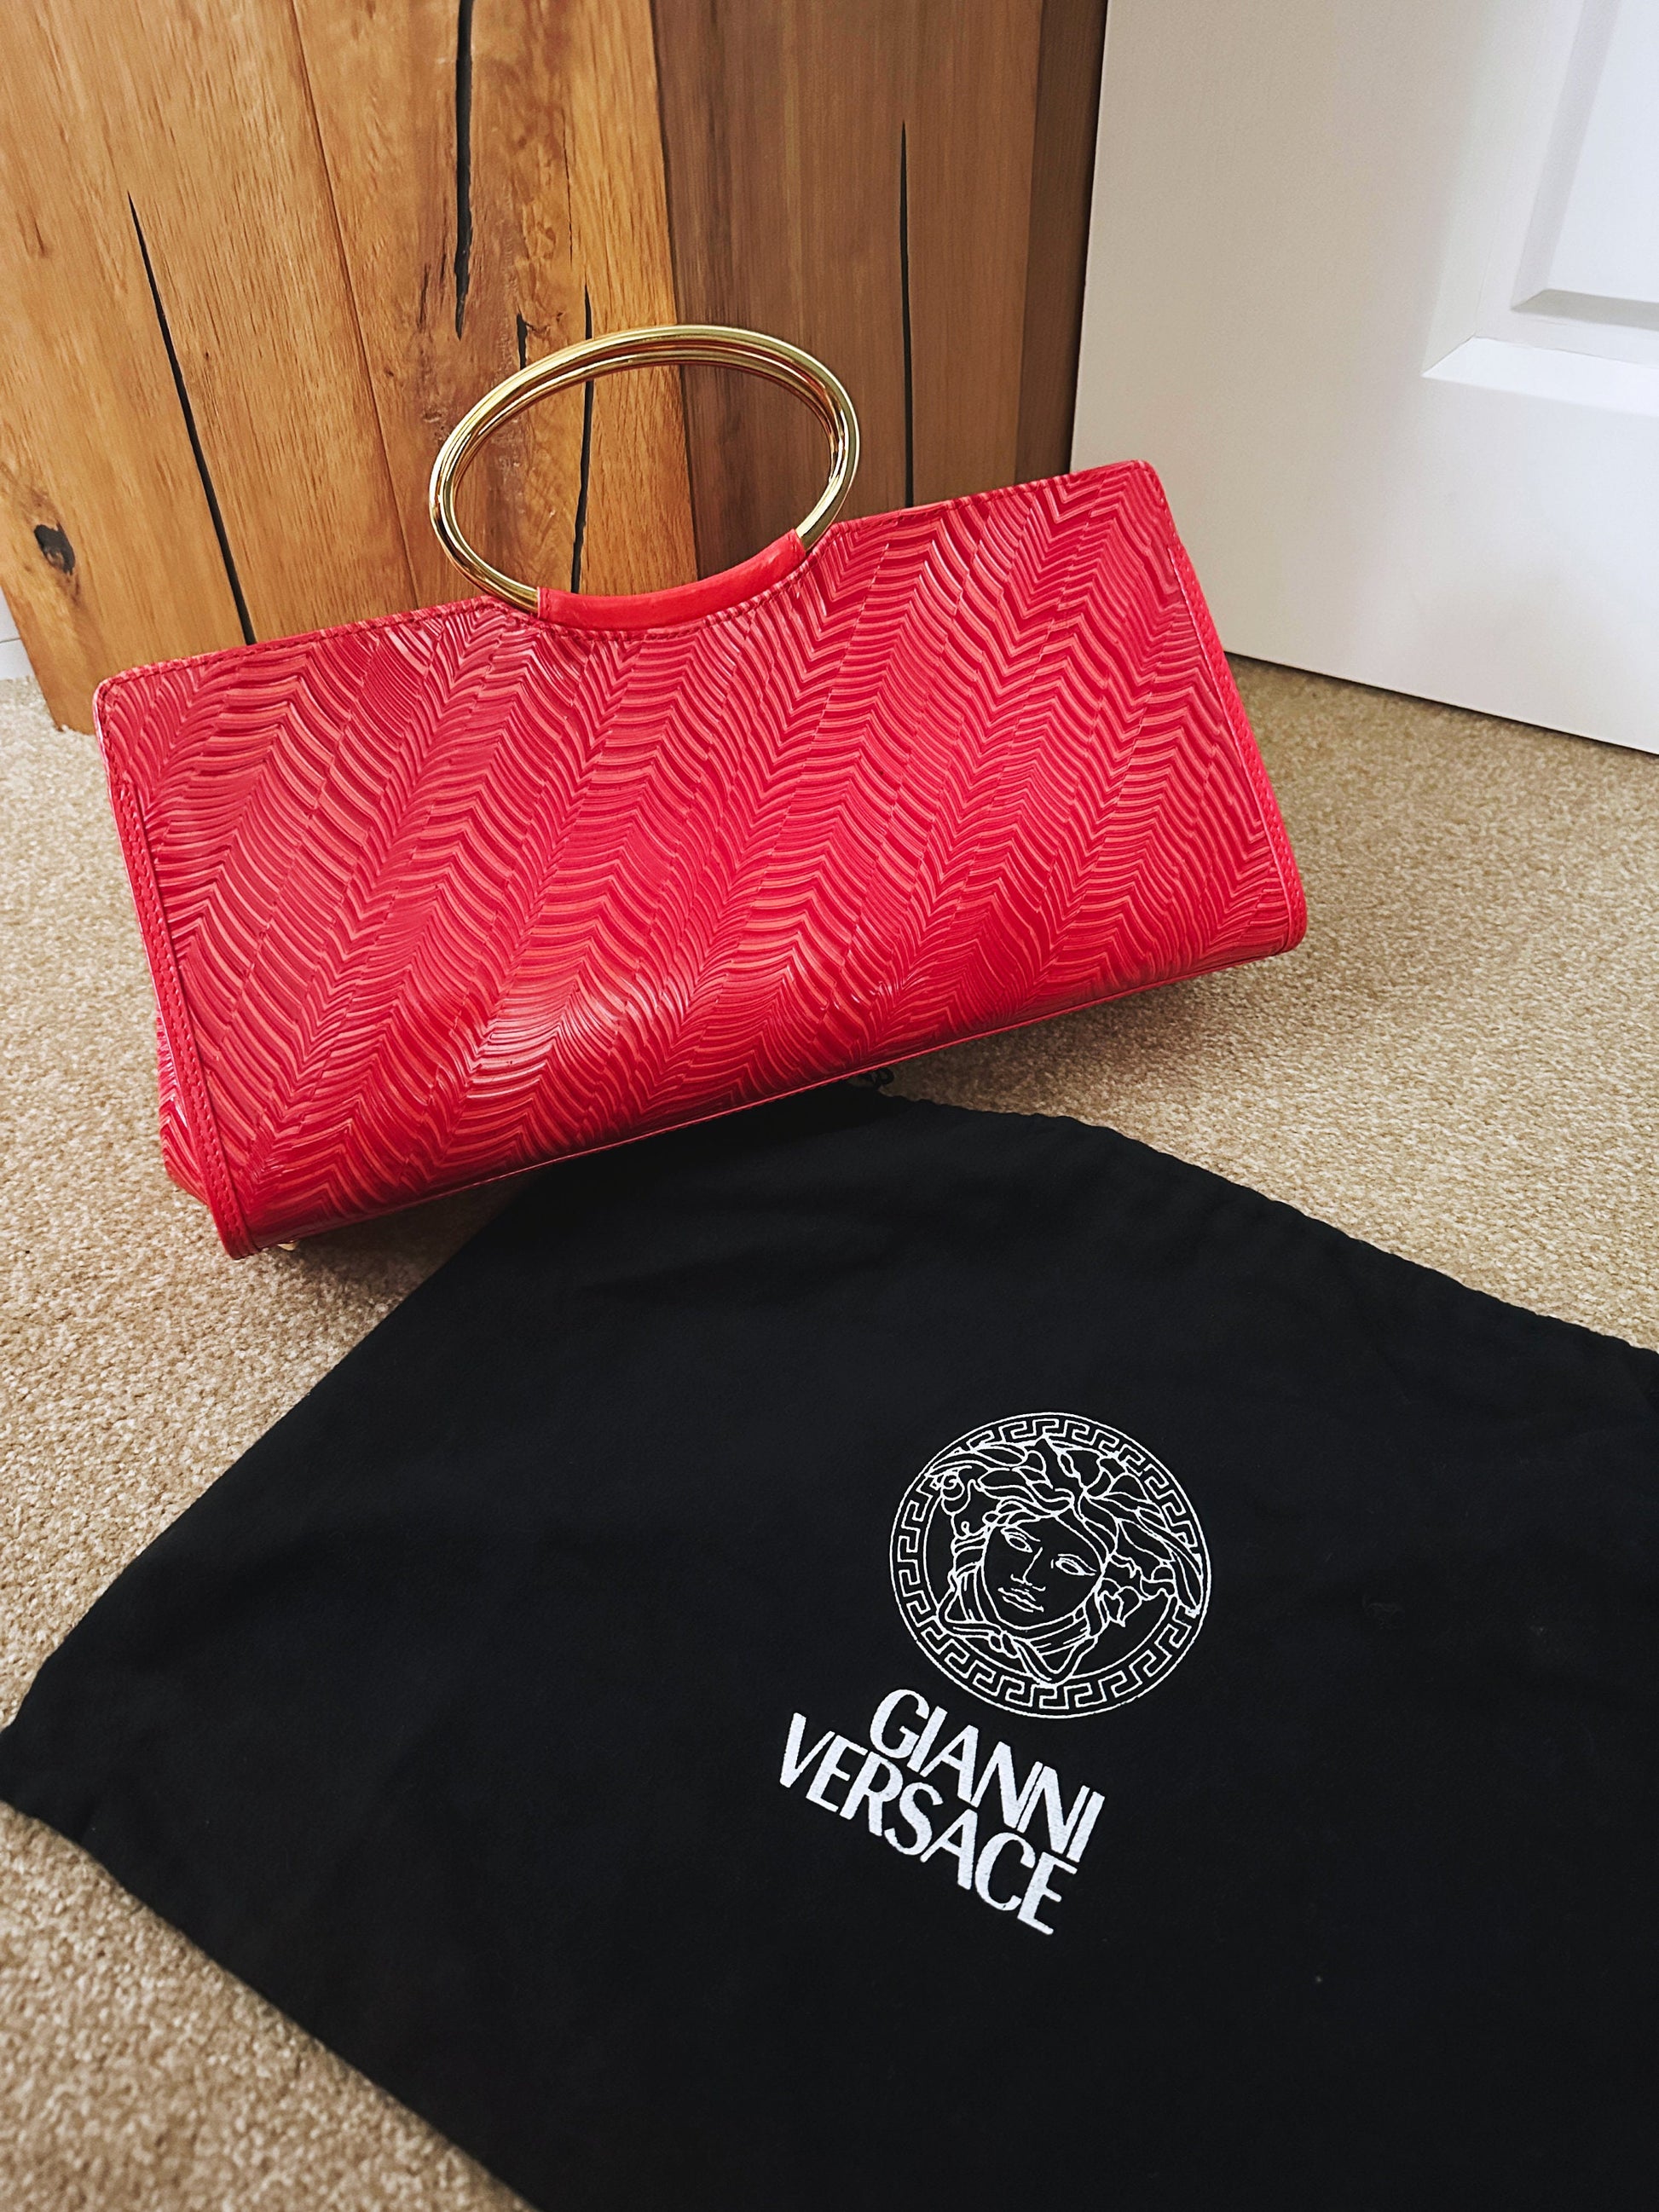 Like New! VERSACE VINTAGE 100% Authentic Genuine, Patent Leather Double Gold Hardware Handle Handbag, Red, late 90's, Grade A